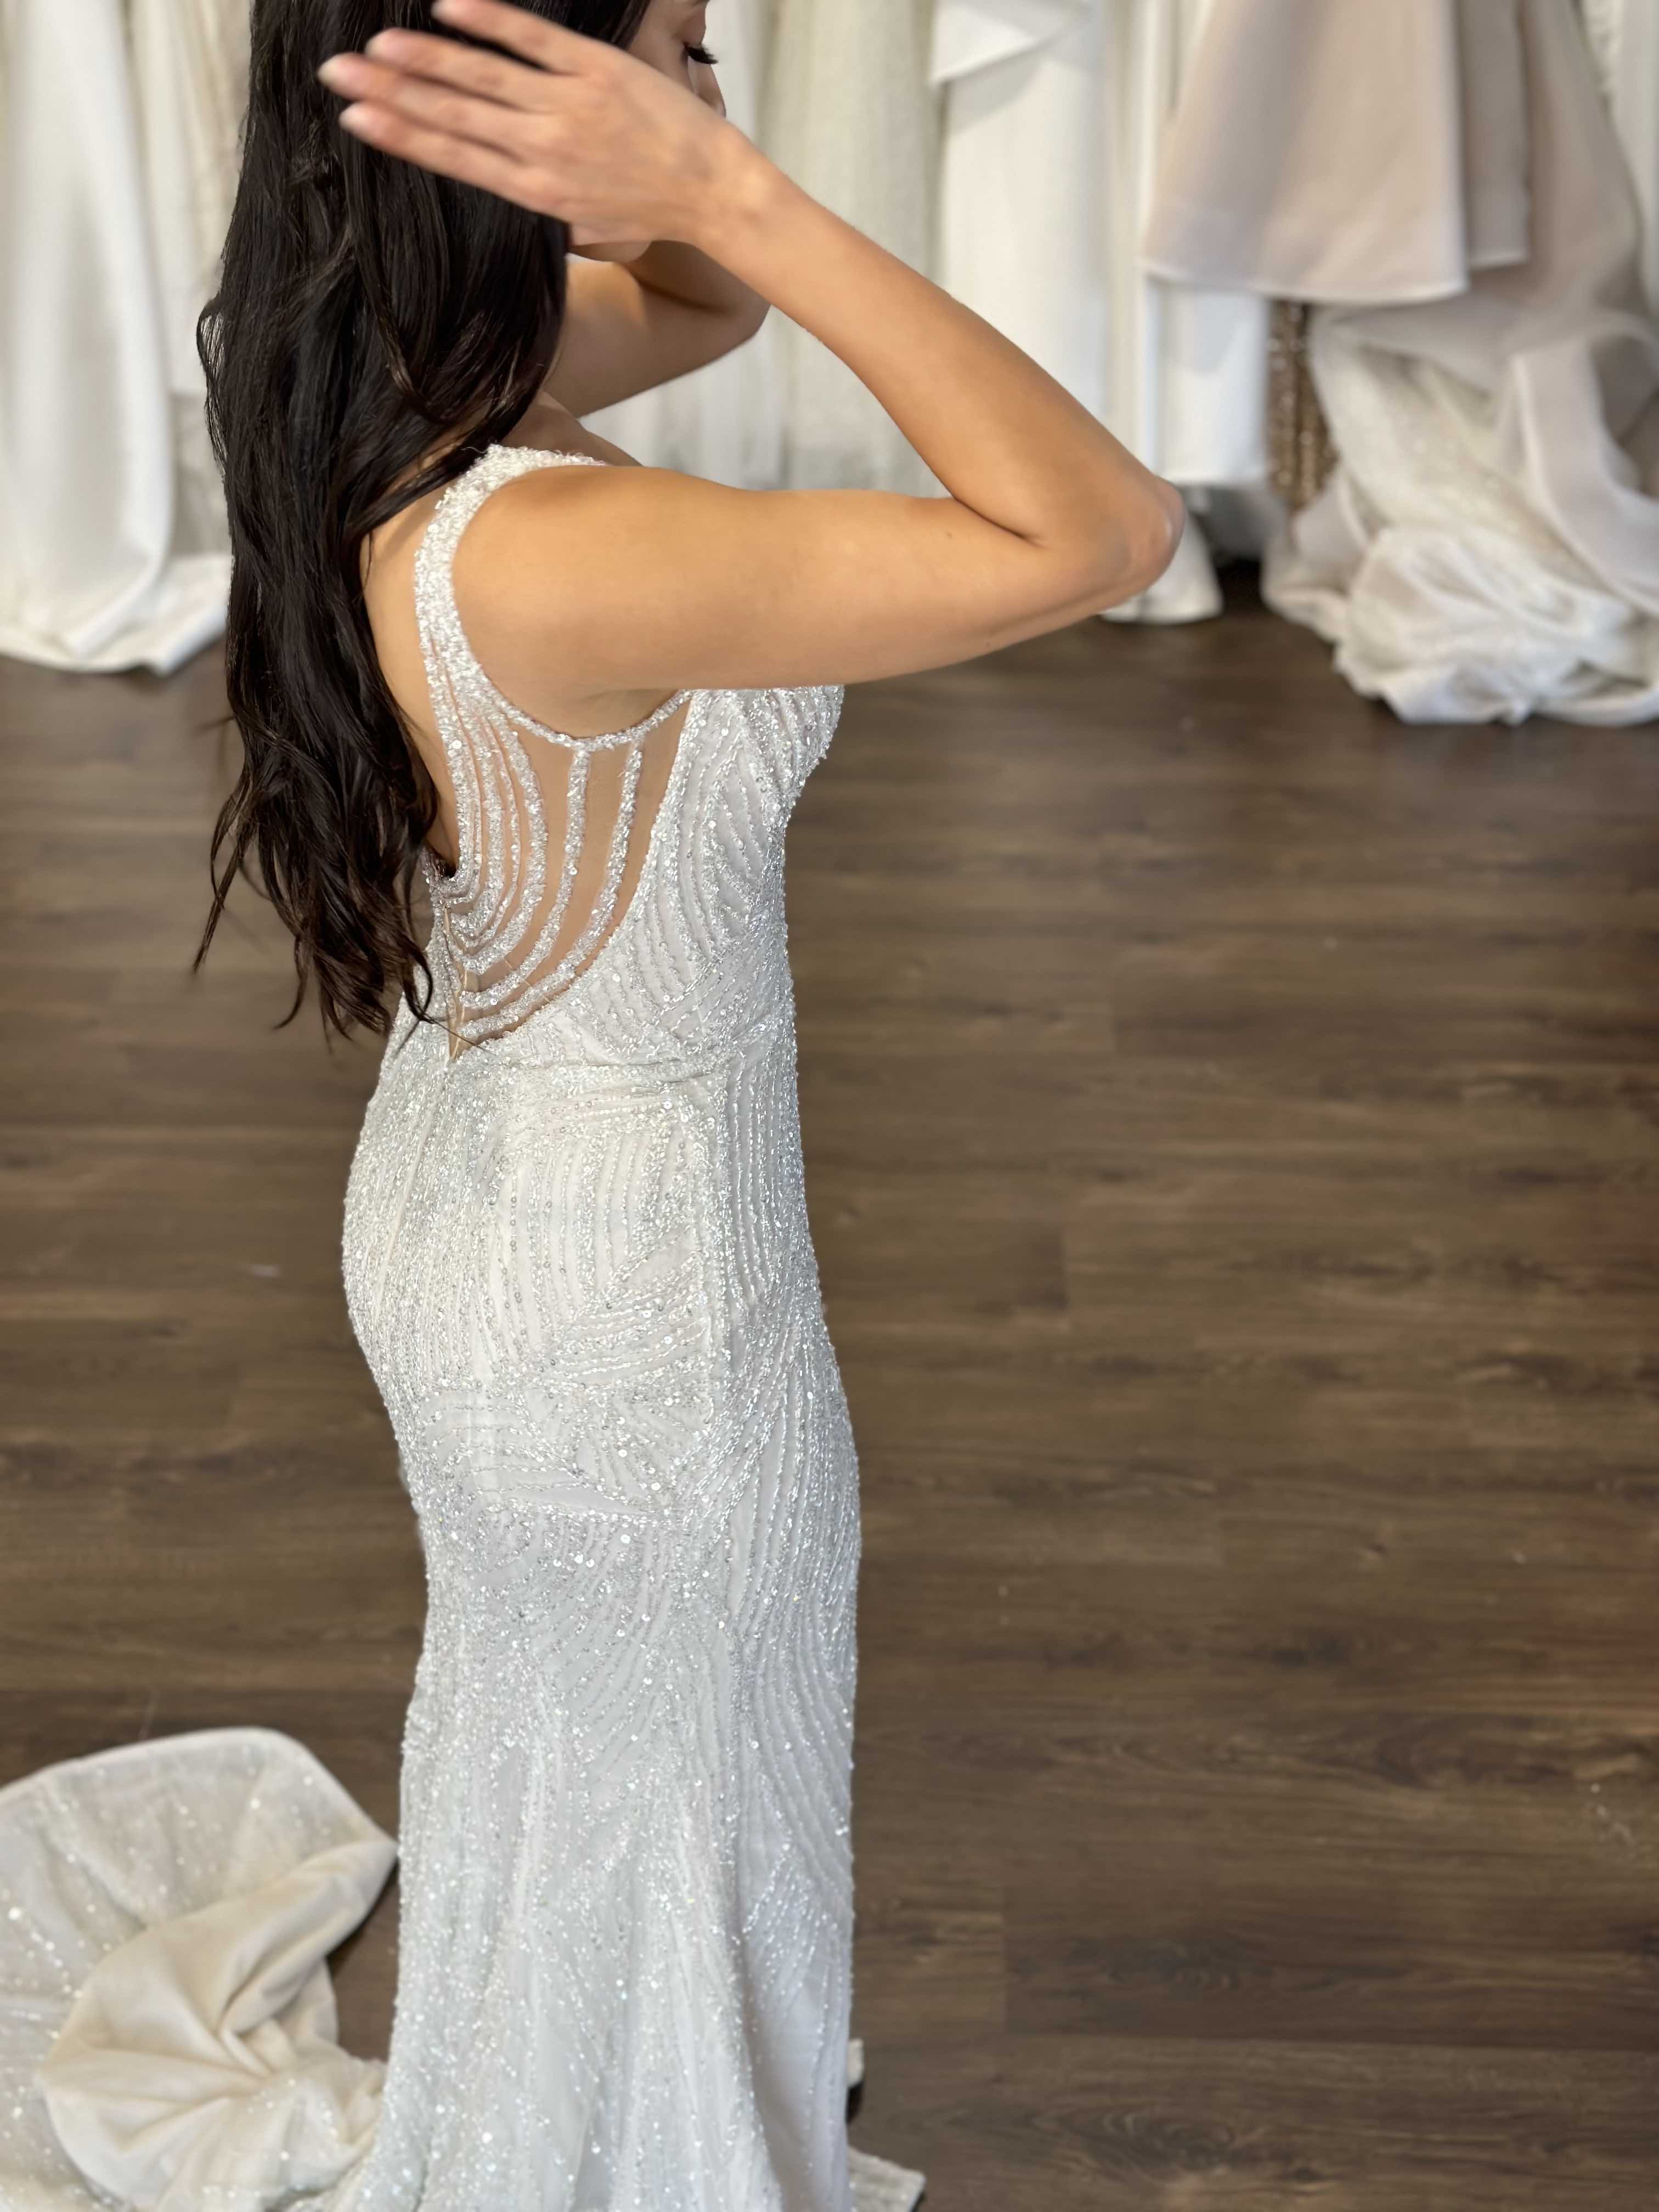 woman running her hands through her hair in lace wedding gown